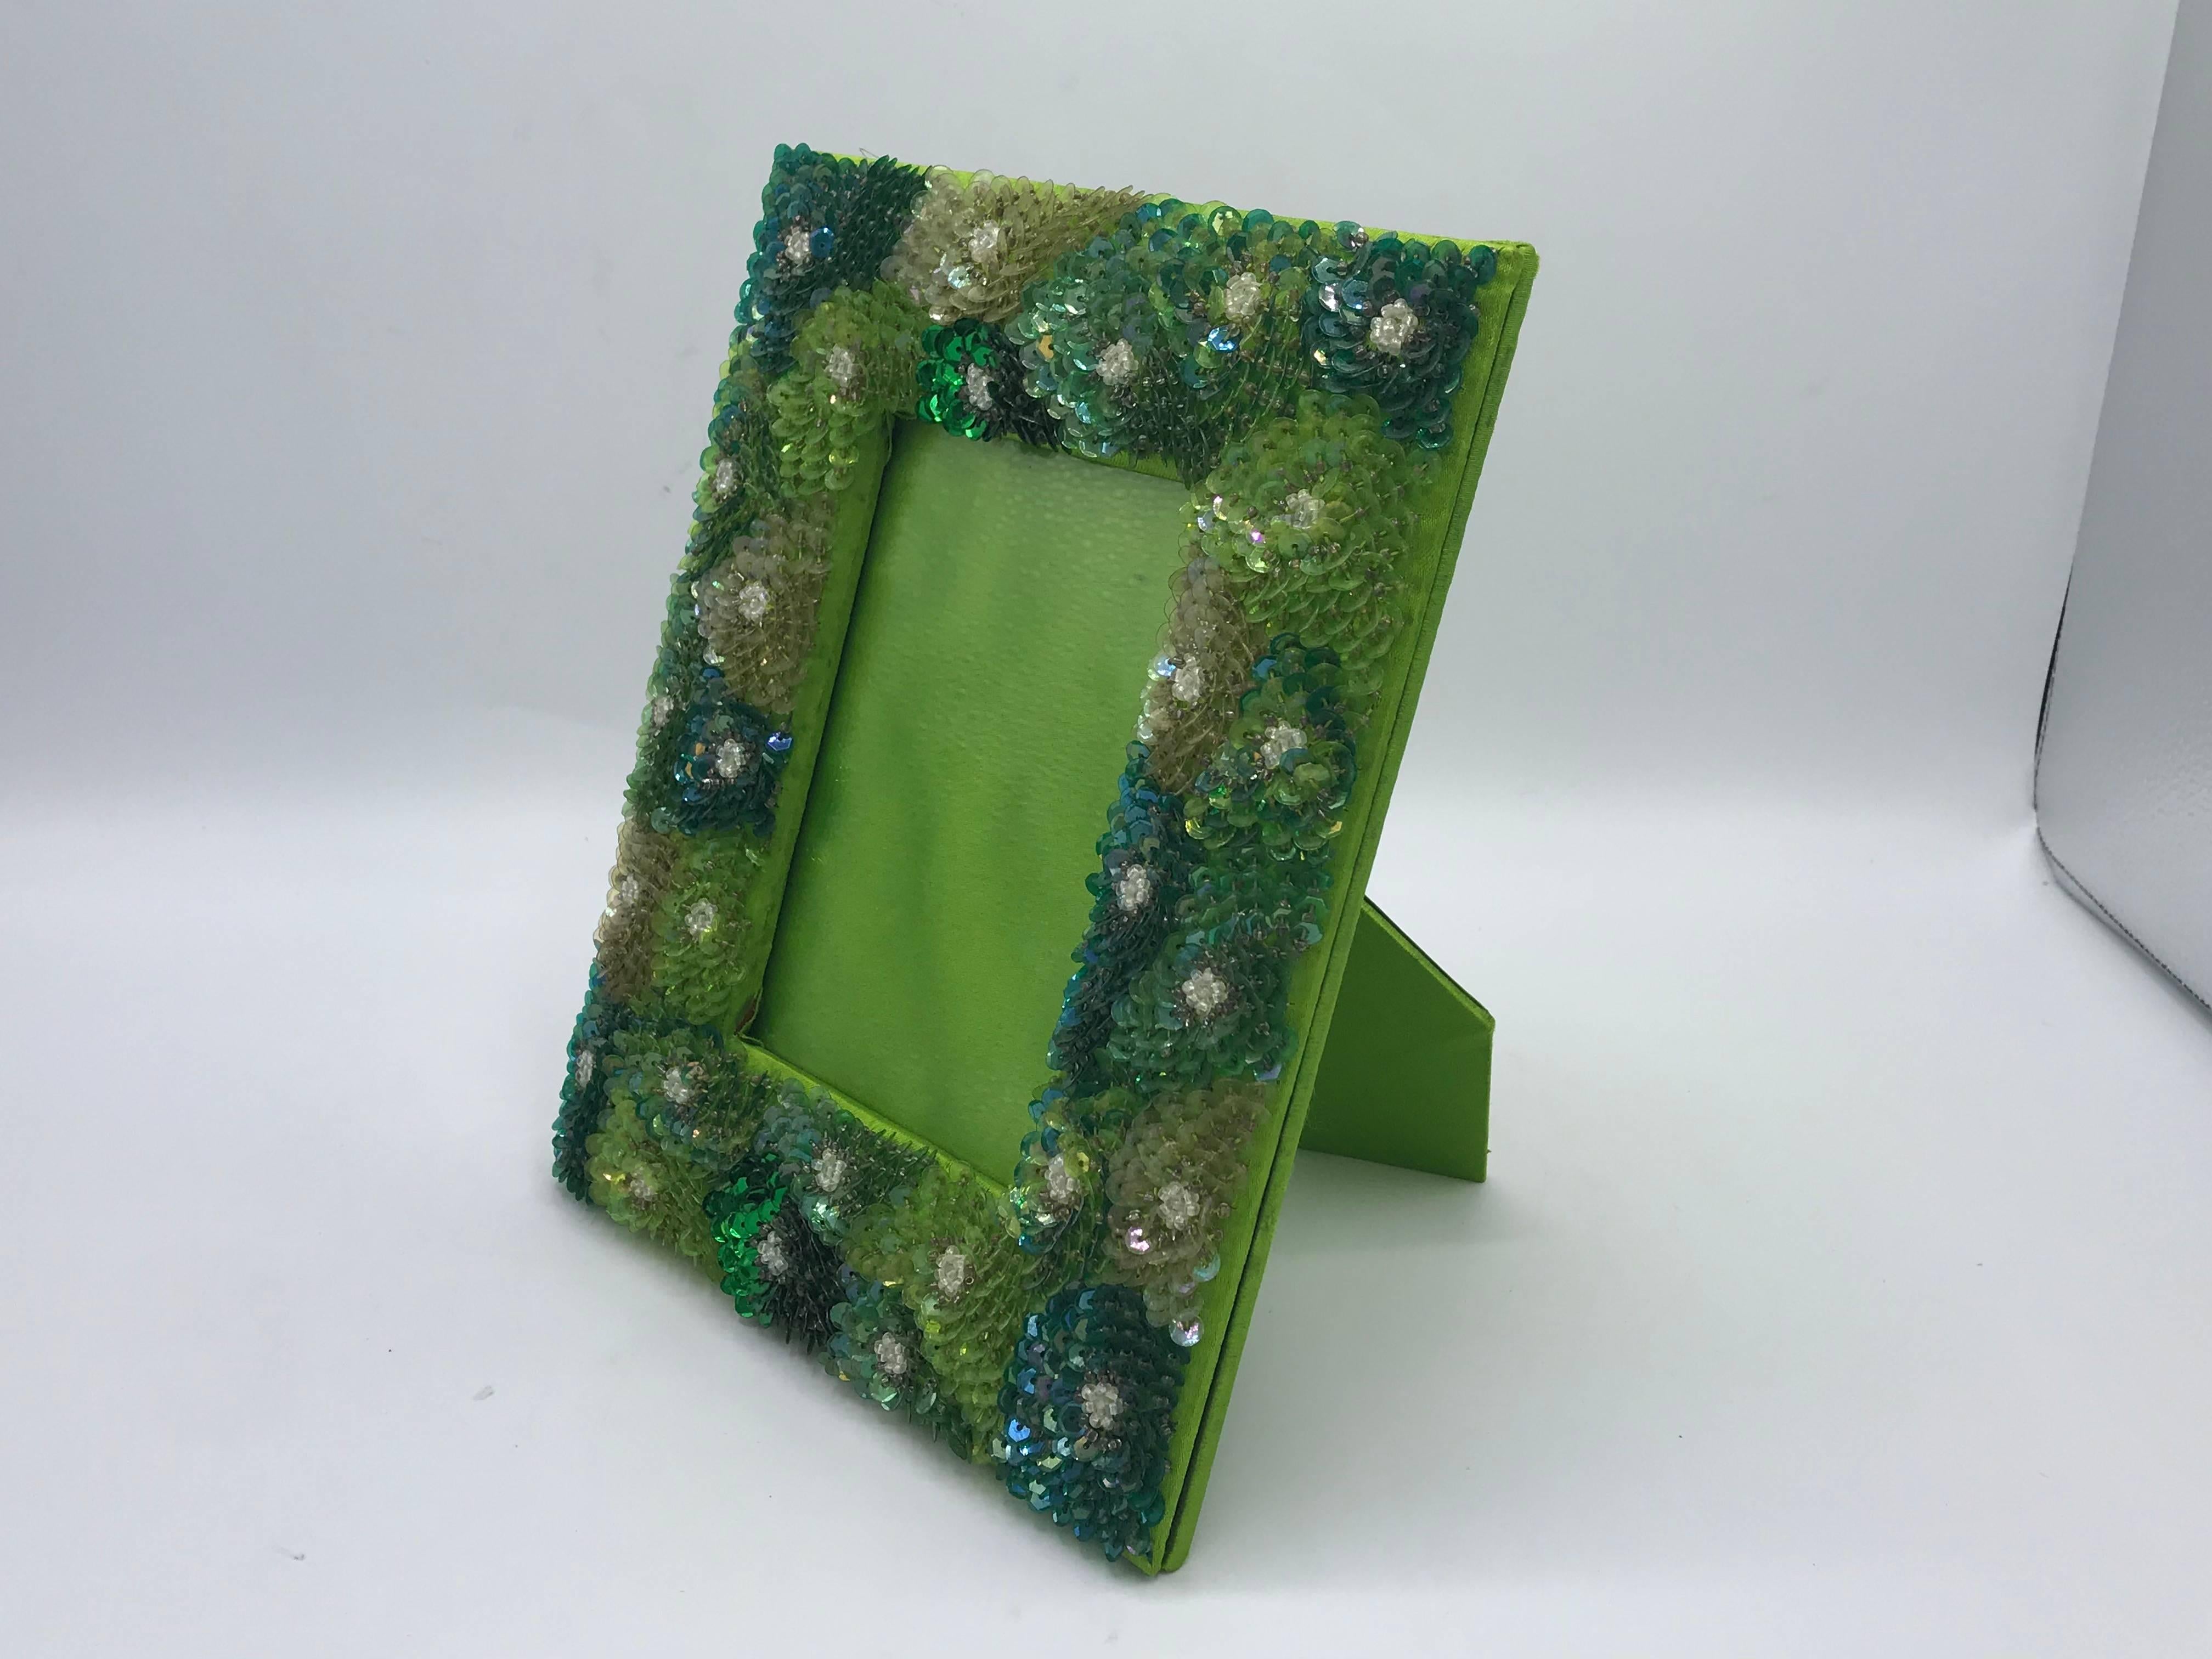 Listed is a glamorous, 1970s modern green sequin embroidered picture frame. Fits a standard 4